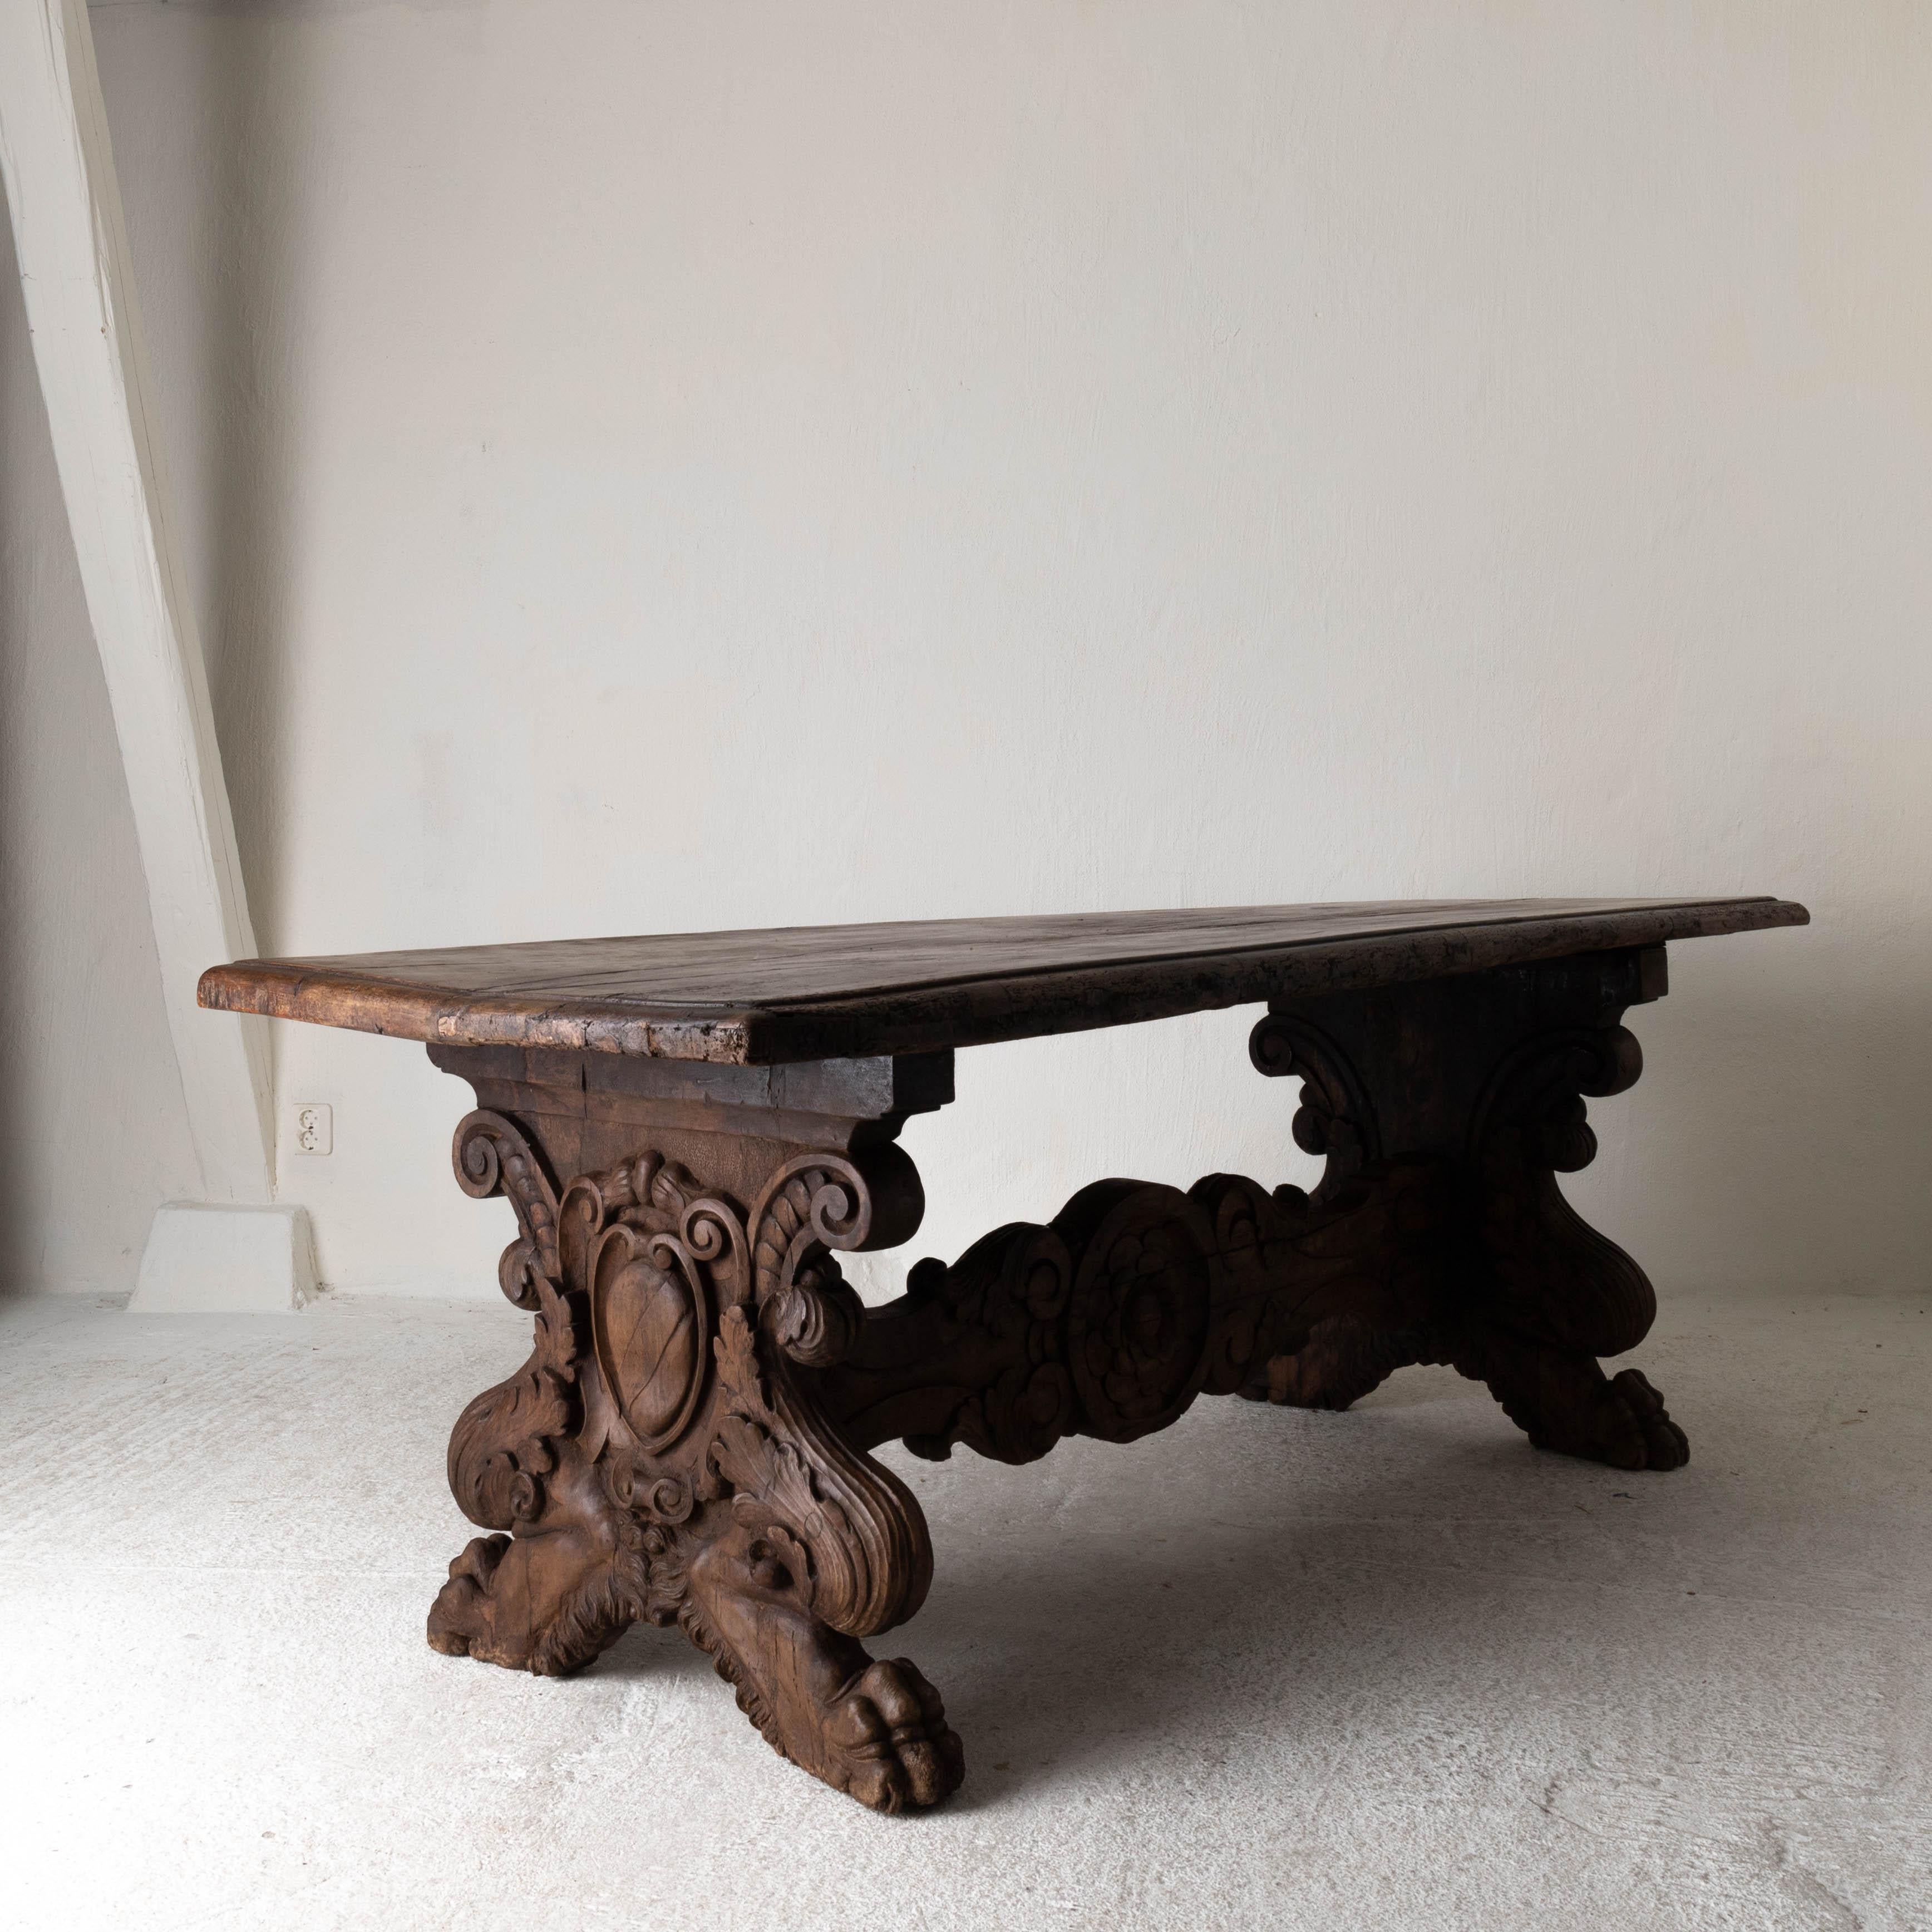 Table rare Baroque Italian oak patina crest details, Italy. A rare and large table made during the Baroque period in Italy. Stunning patina of the solid oakwood. Each side of the base has a crest detail. Feet in the shape of lion paws and decorated